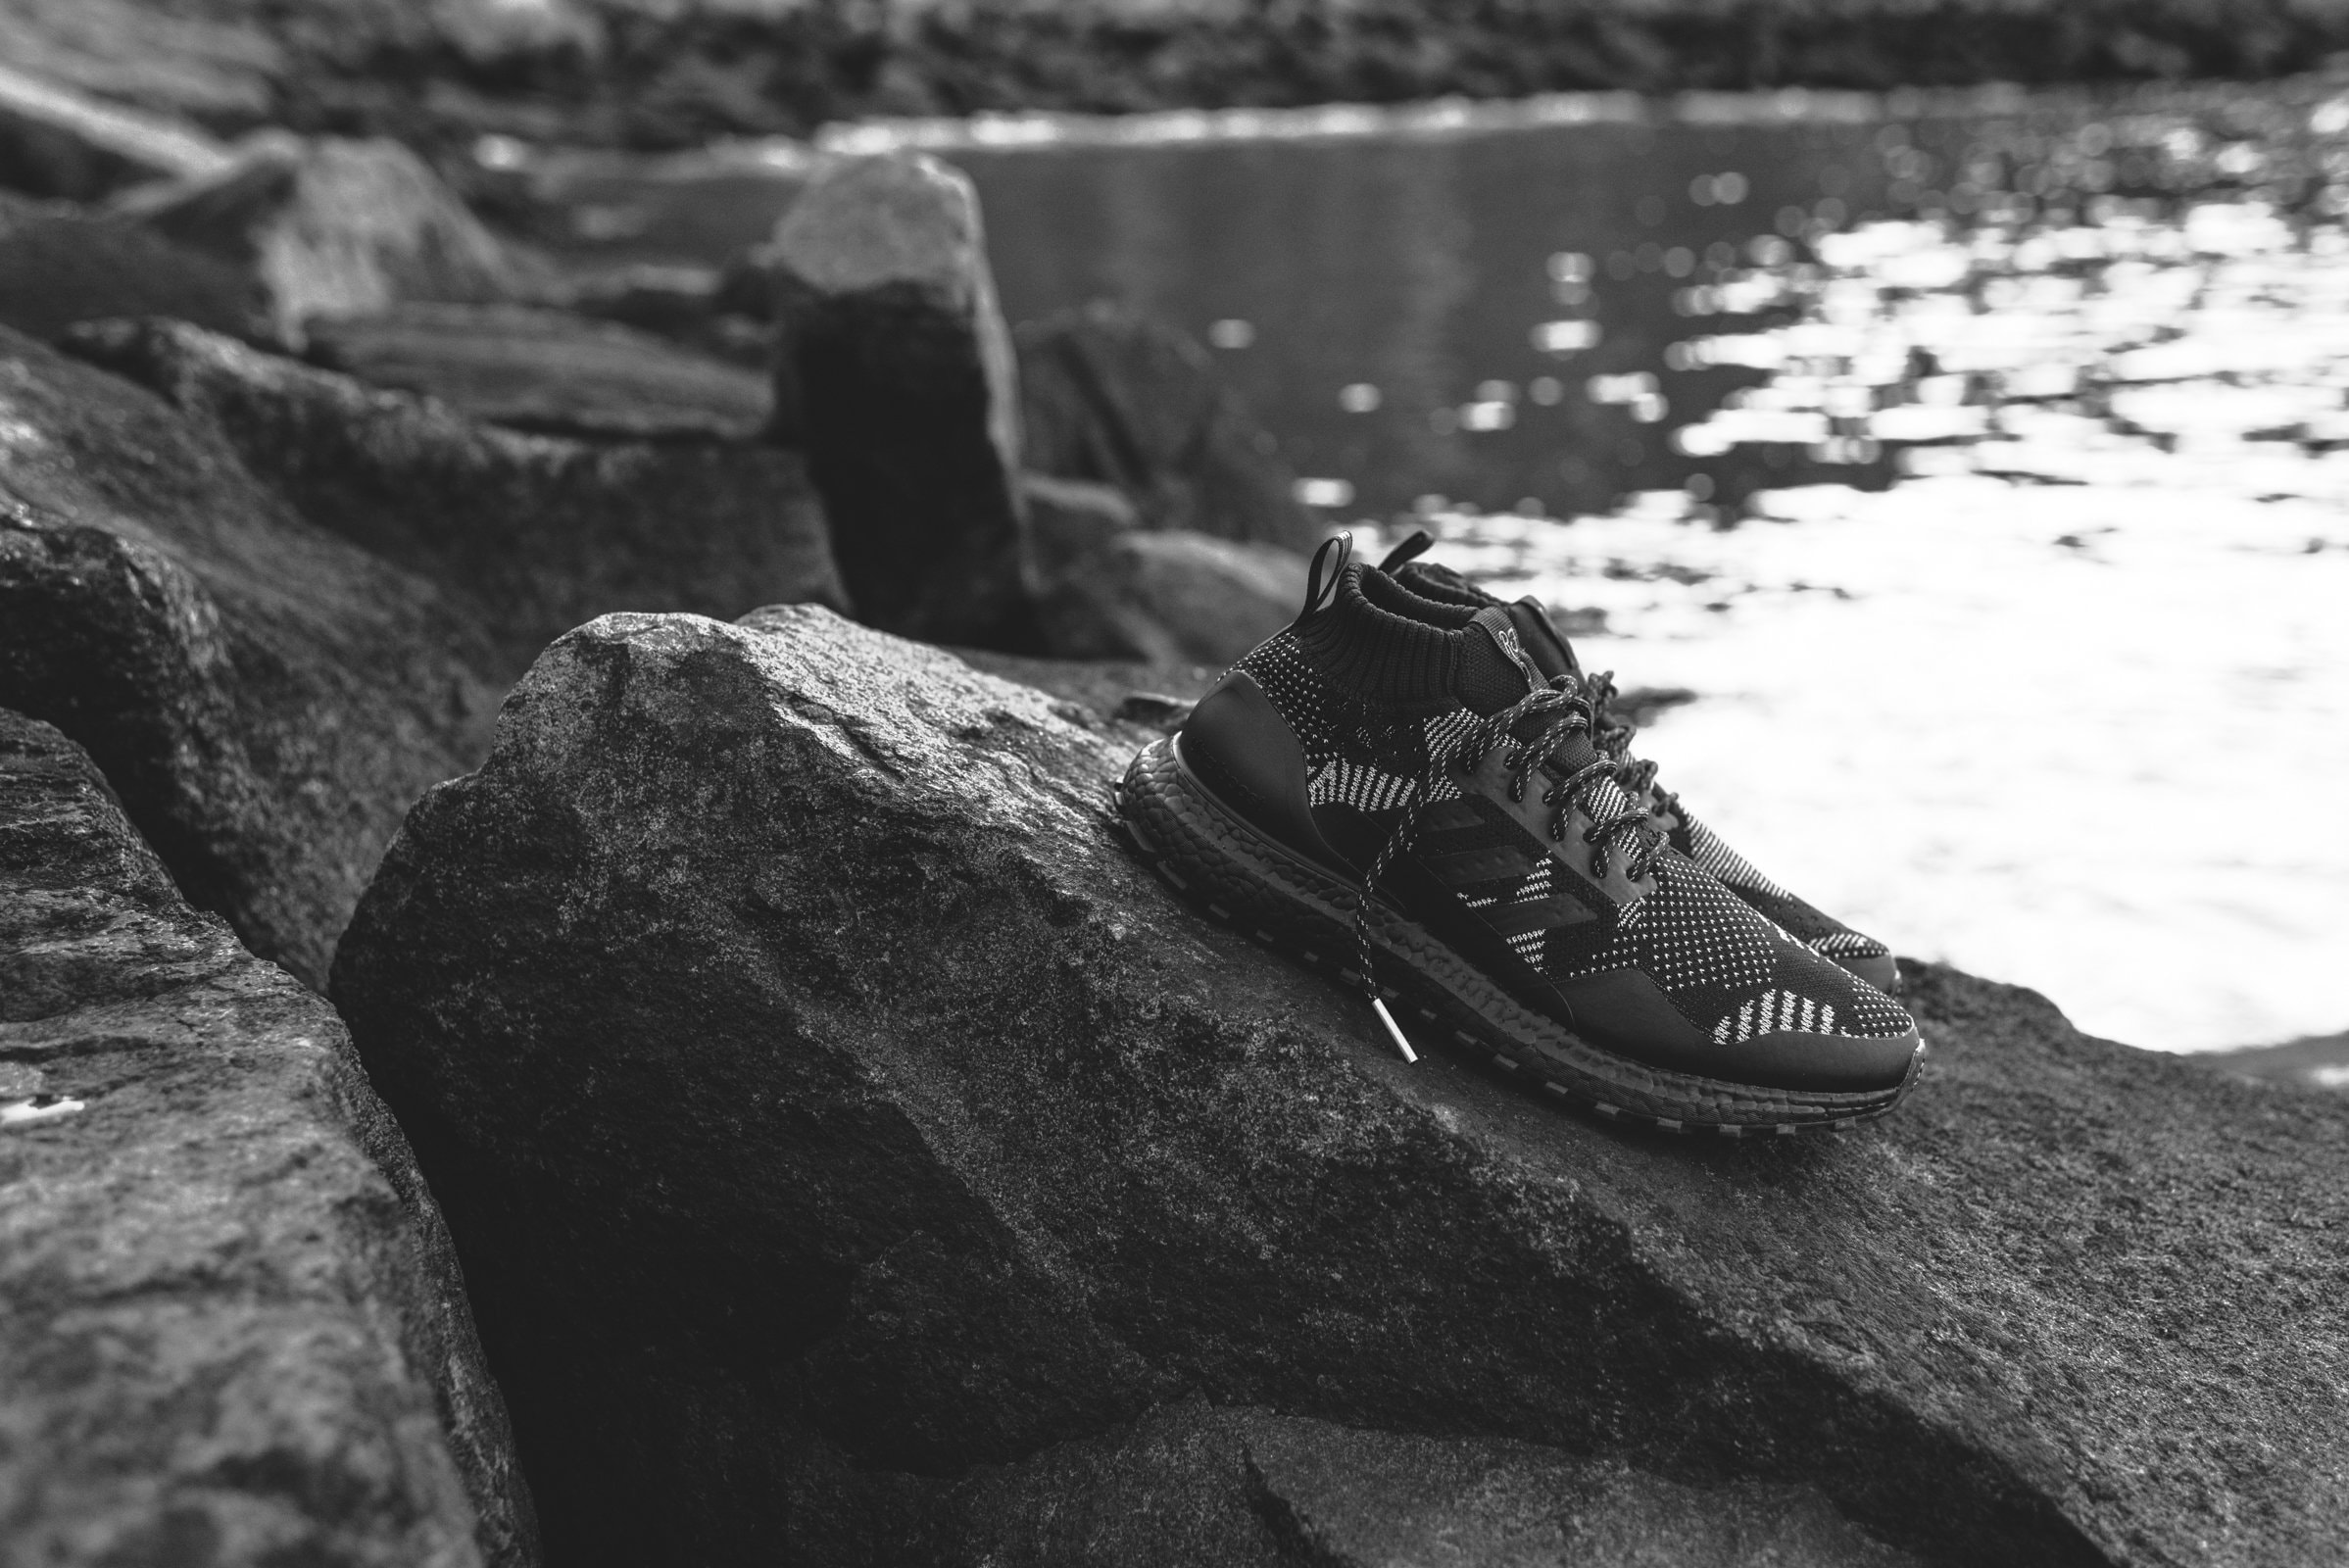 KITH nonnative adidas UltraBOOST Mid Consortium Twinstrike Originals Collaboration Japan United Arrows webstore black patchwork 3m drop release date info time app closer look black friday midnight 2017 november 24 Japan New York Ronnie Fieg KITH App